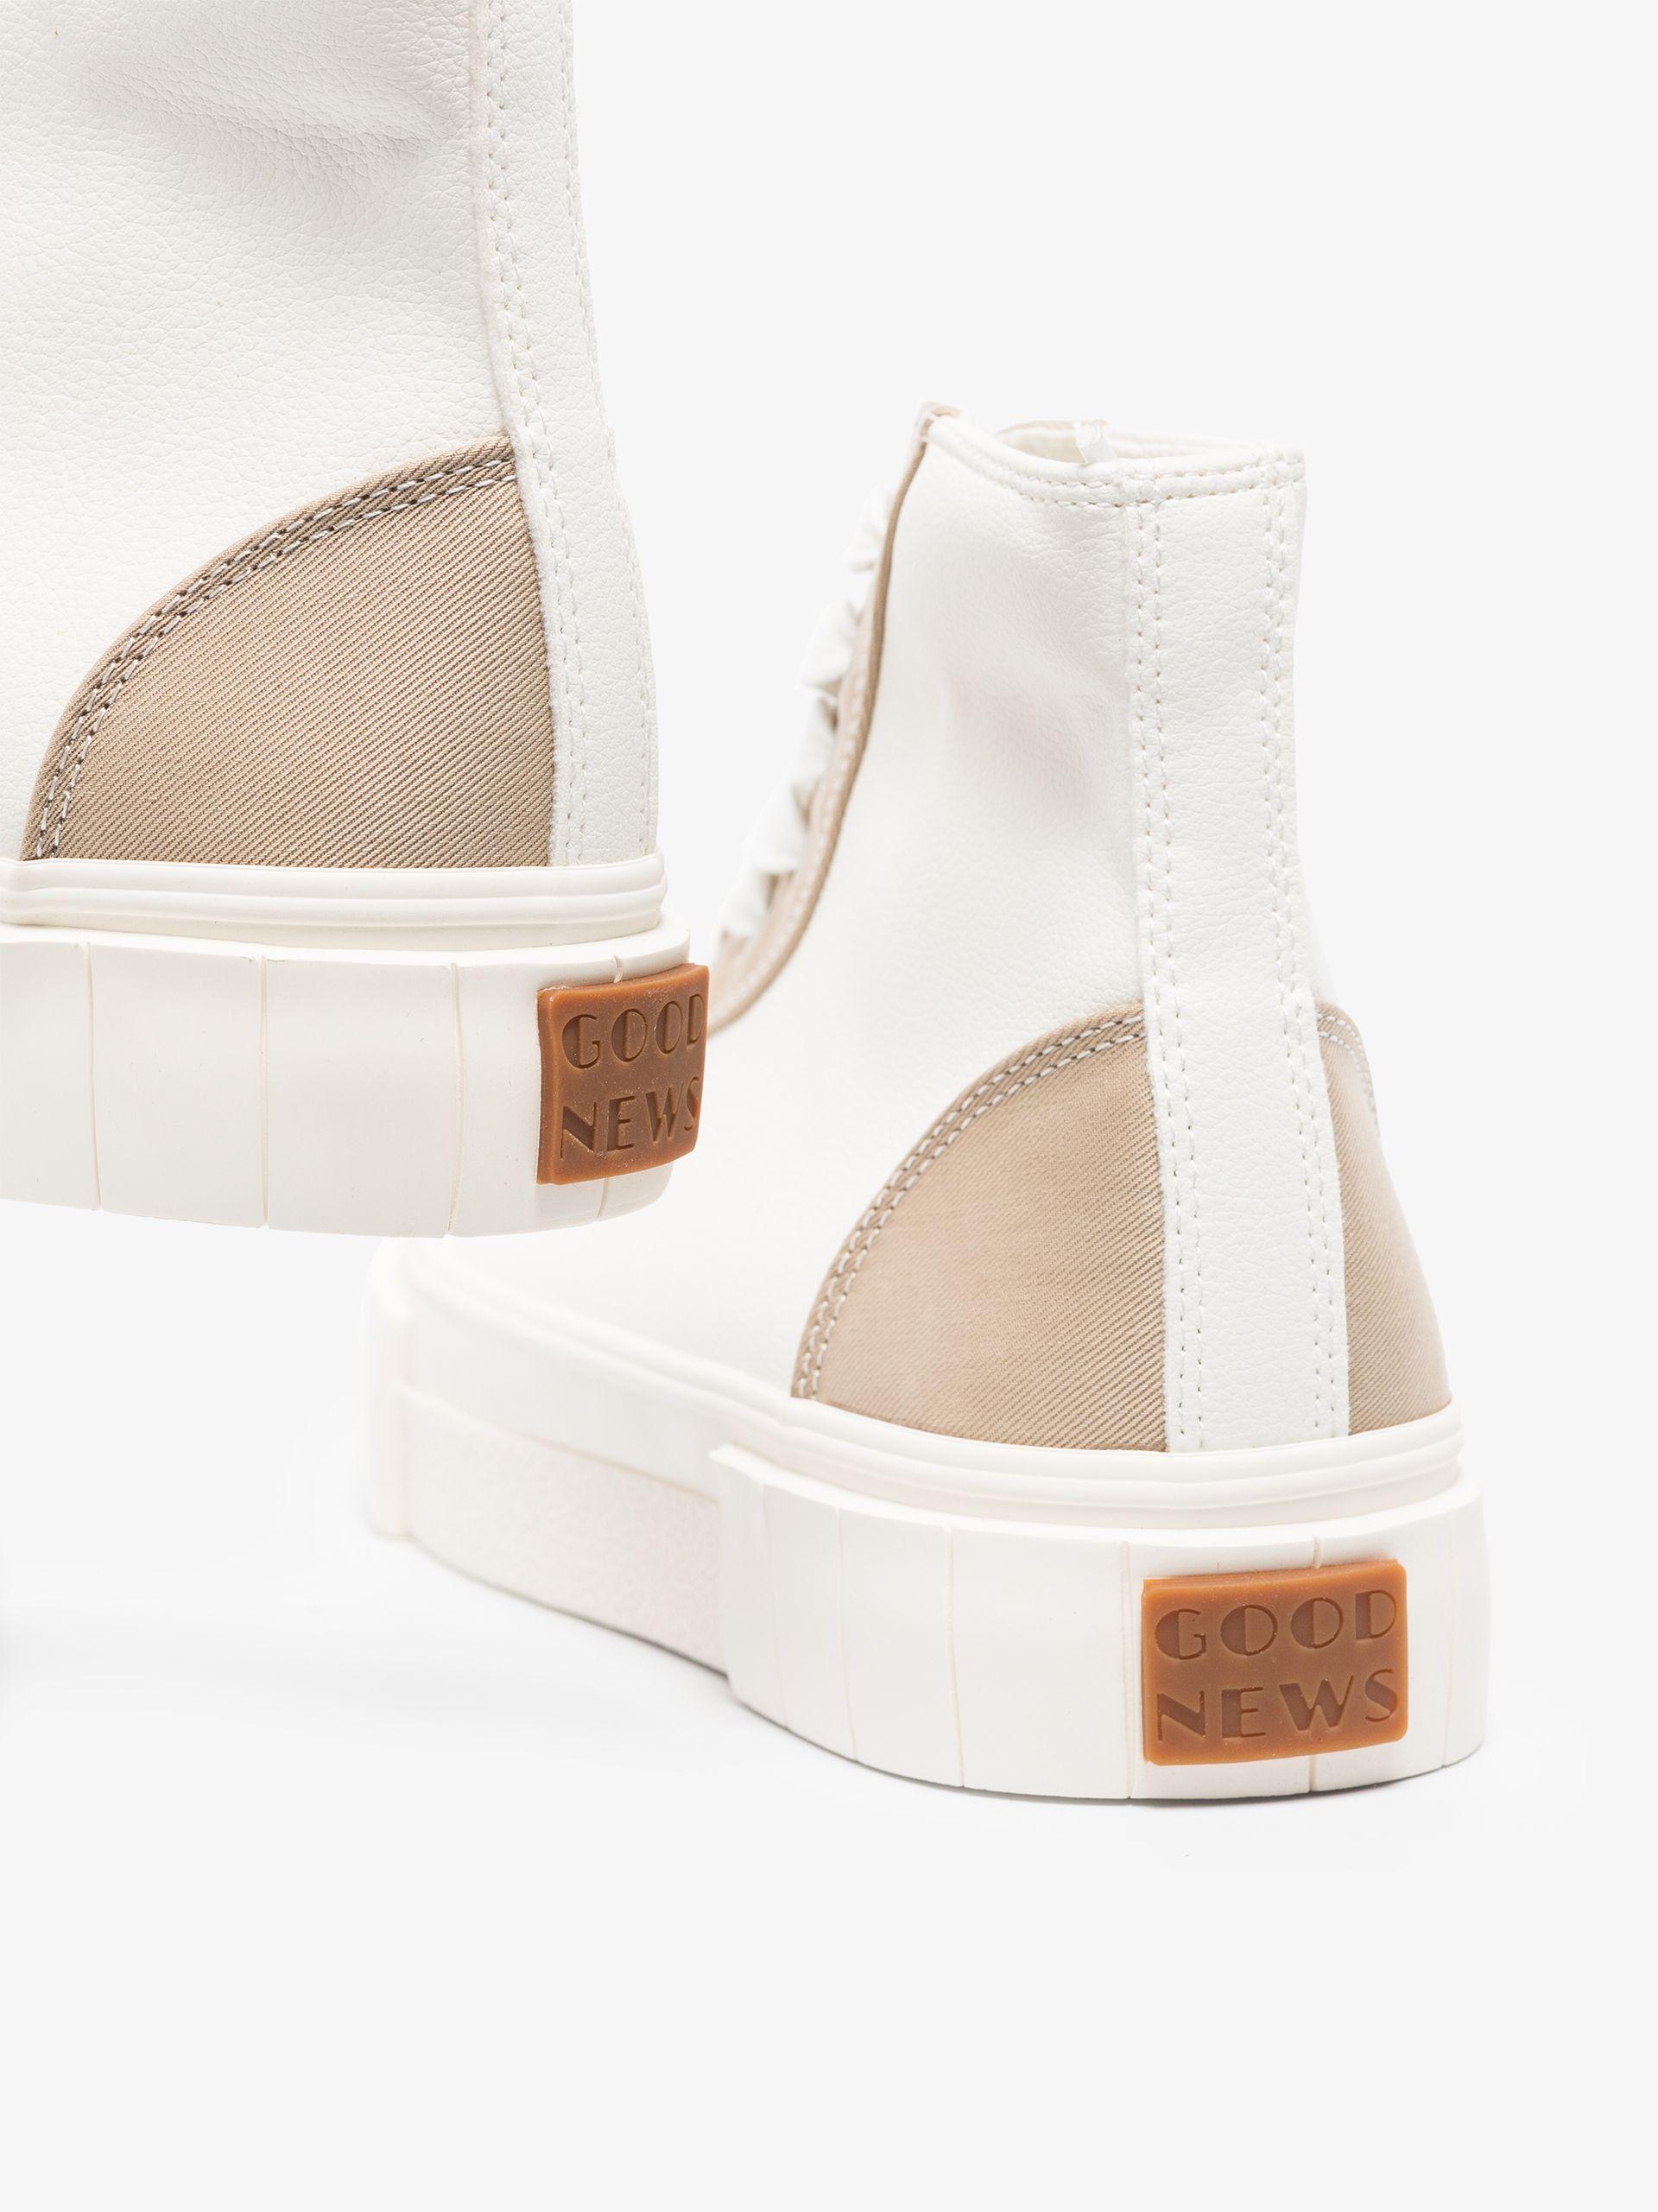 Goodnews Cotton Palm Vegea High Top Sneakers in White - Lyst